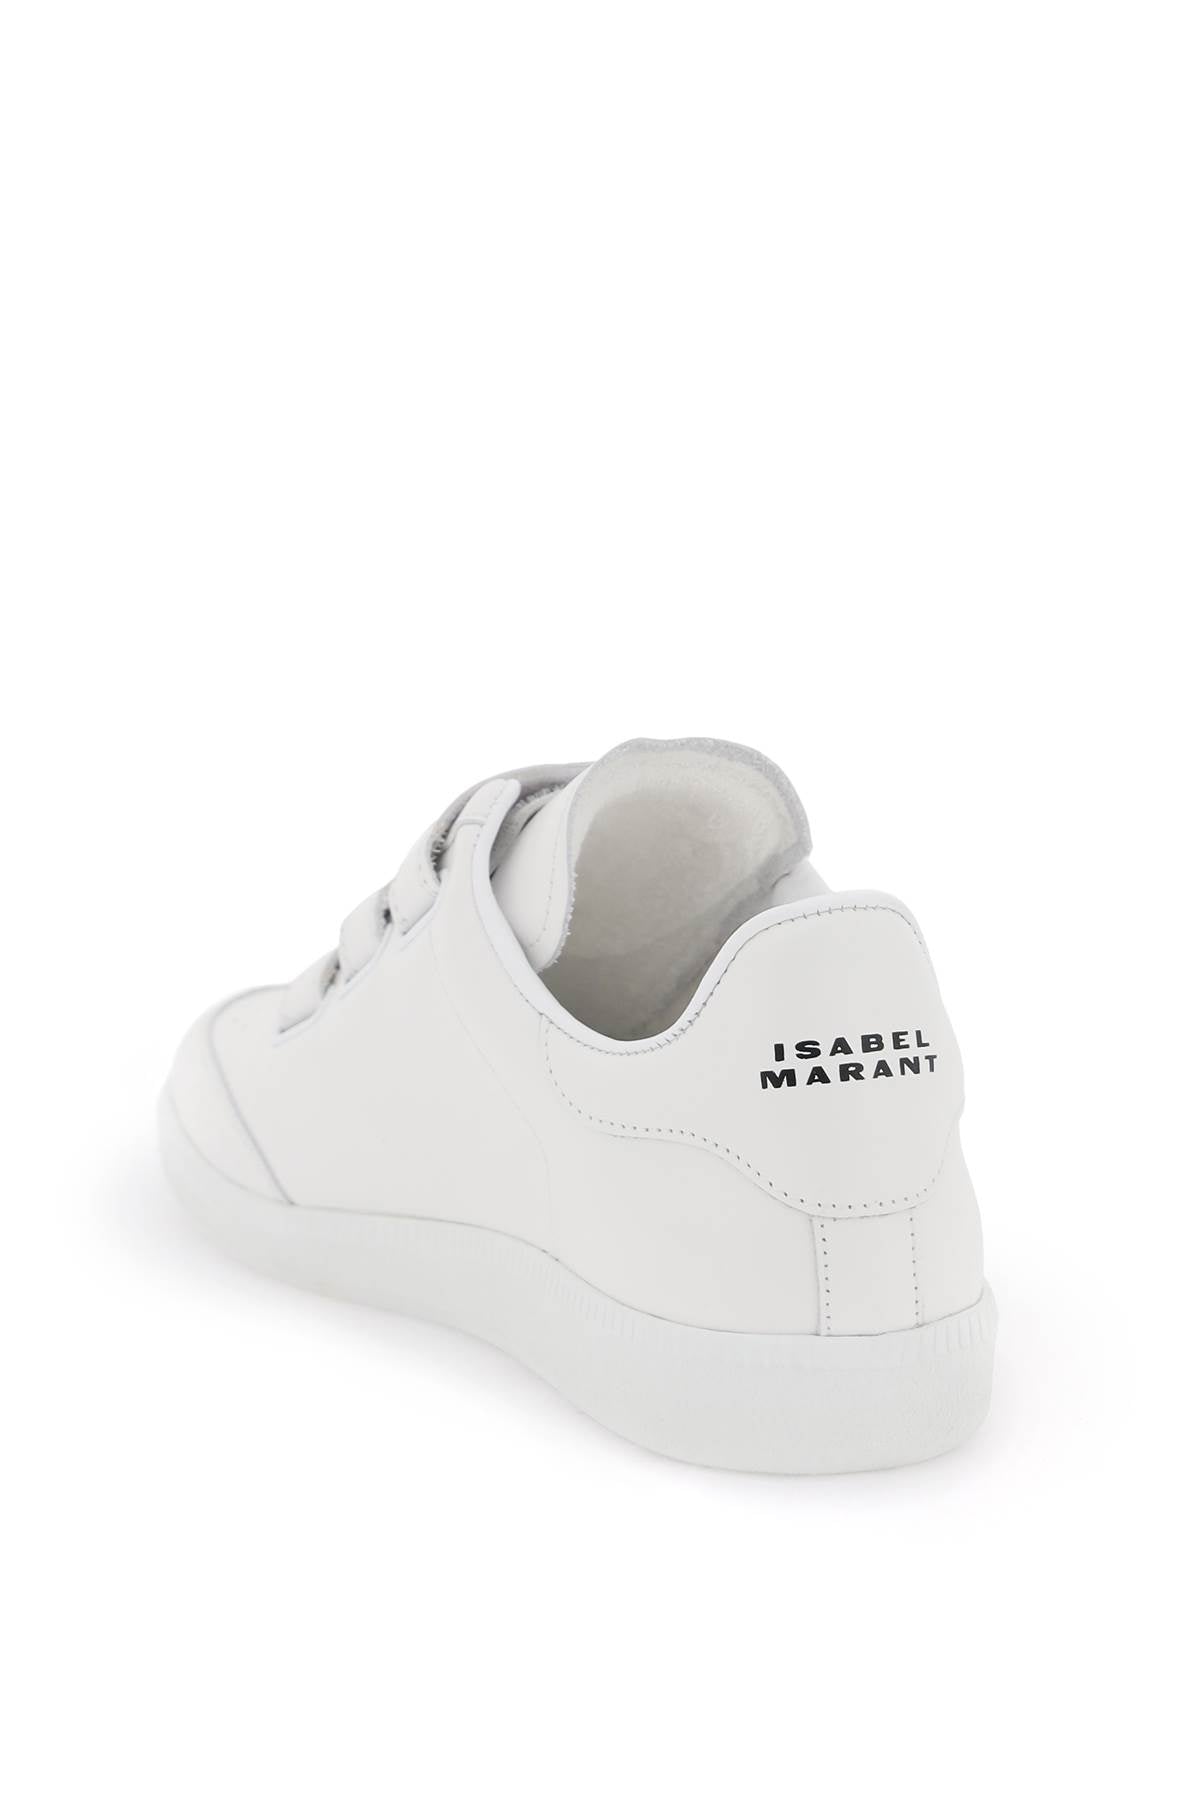 Isabel marant etoile beth leather sneakers-2